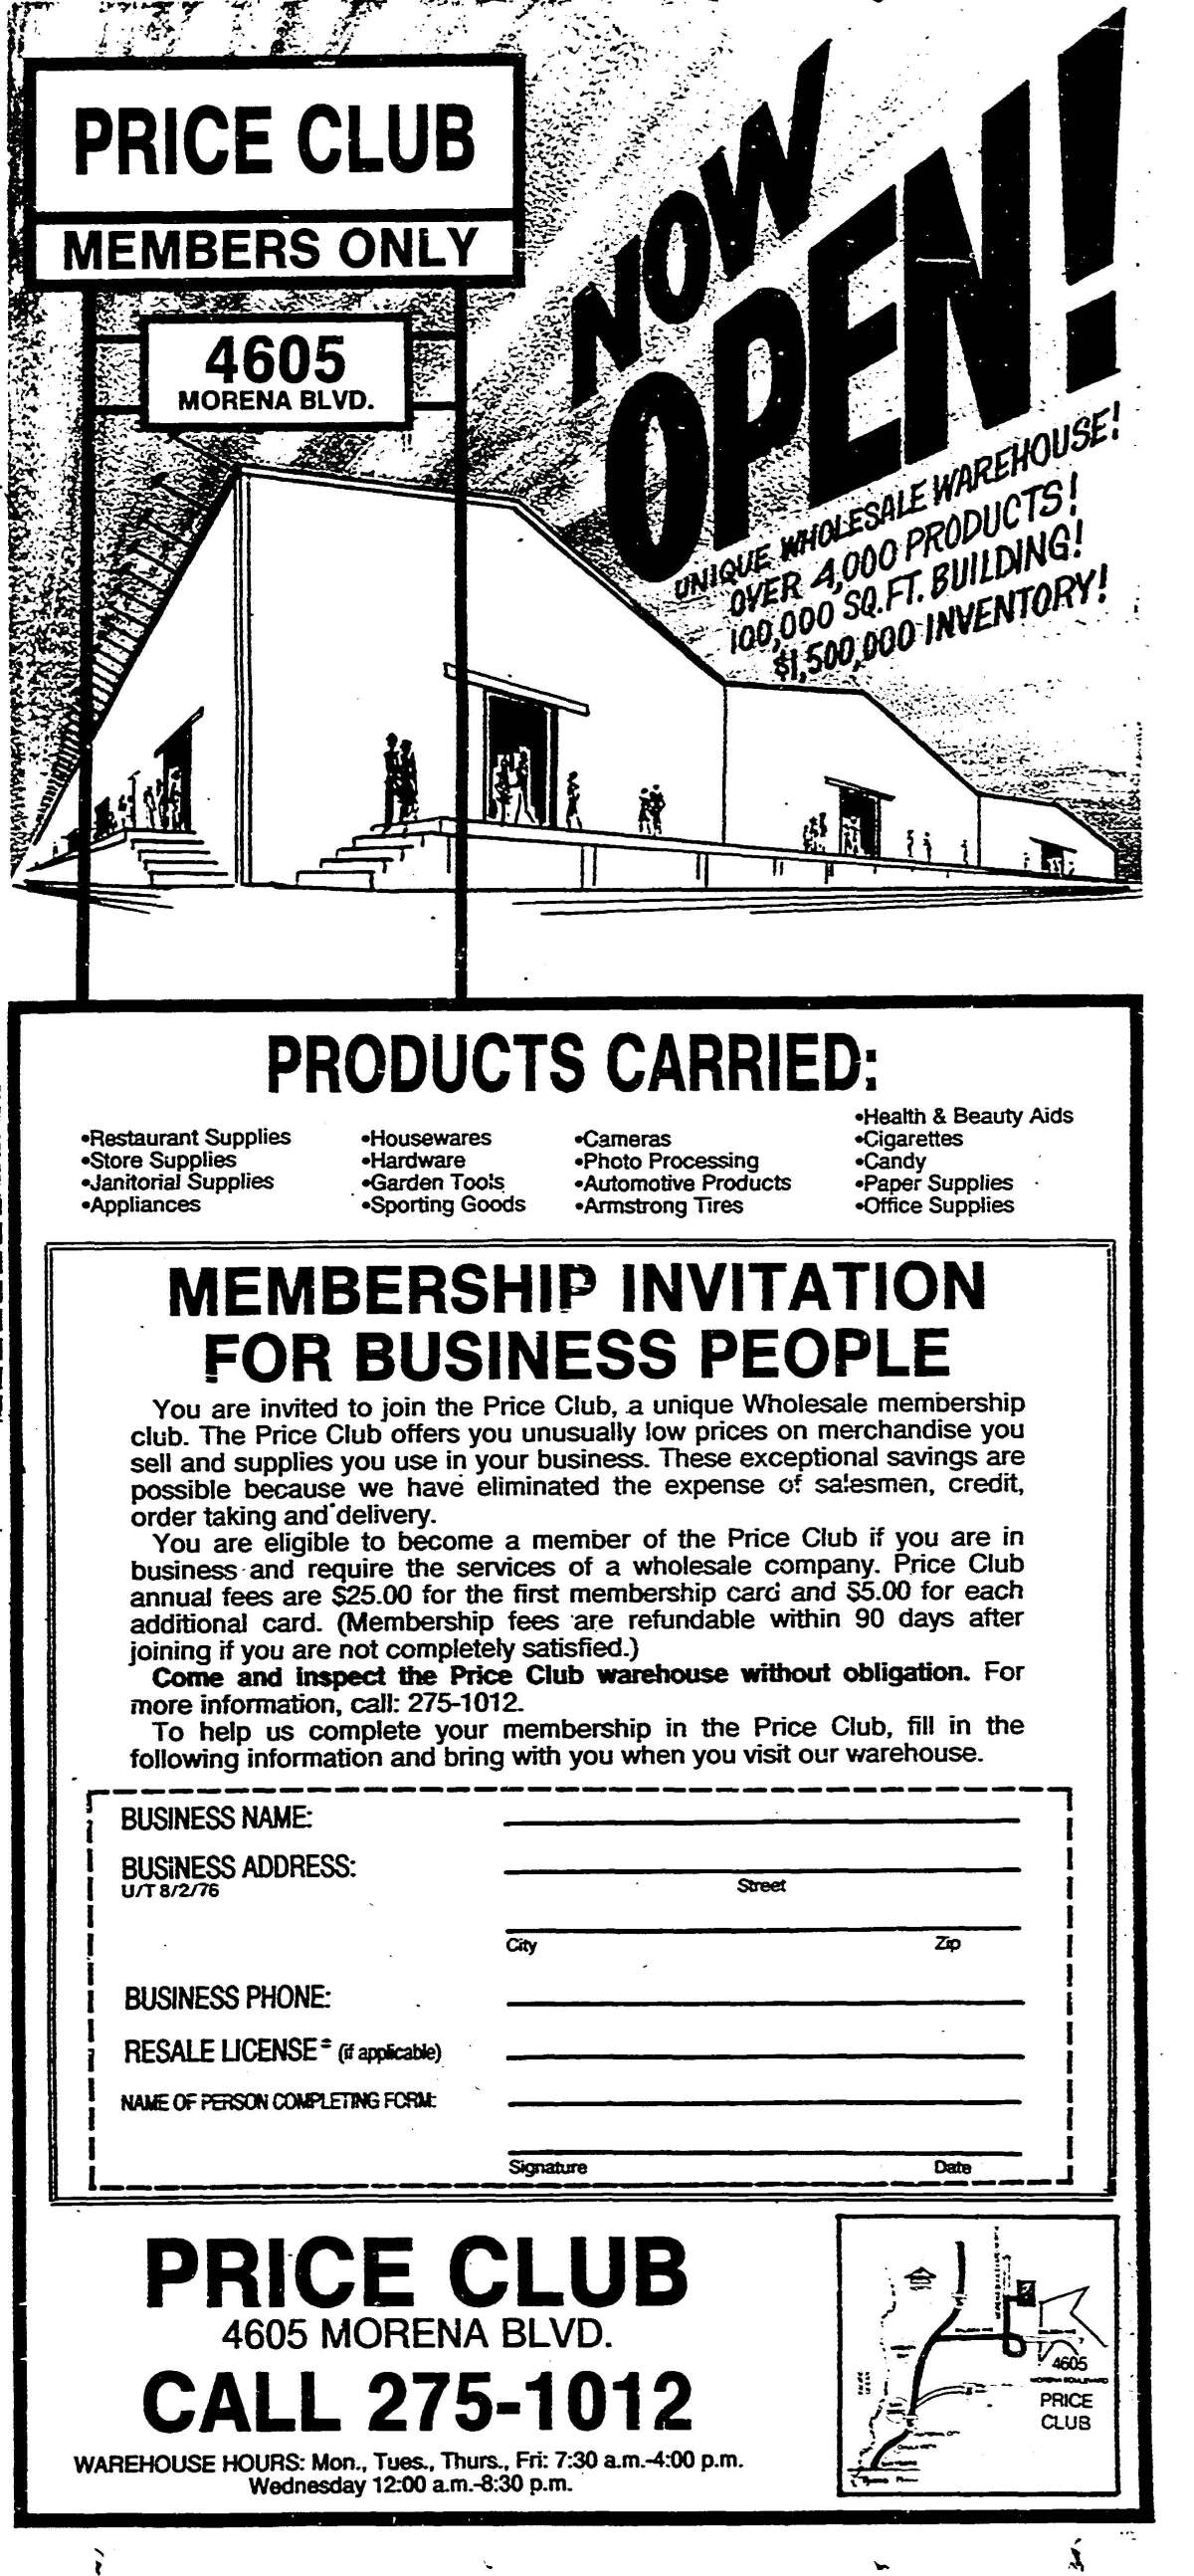 Price Club advertisement published in The San Diego Union in August, 1976.